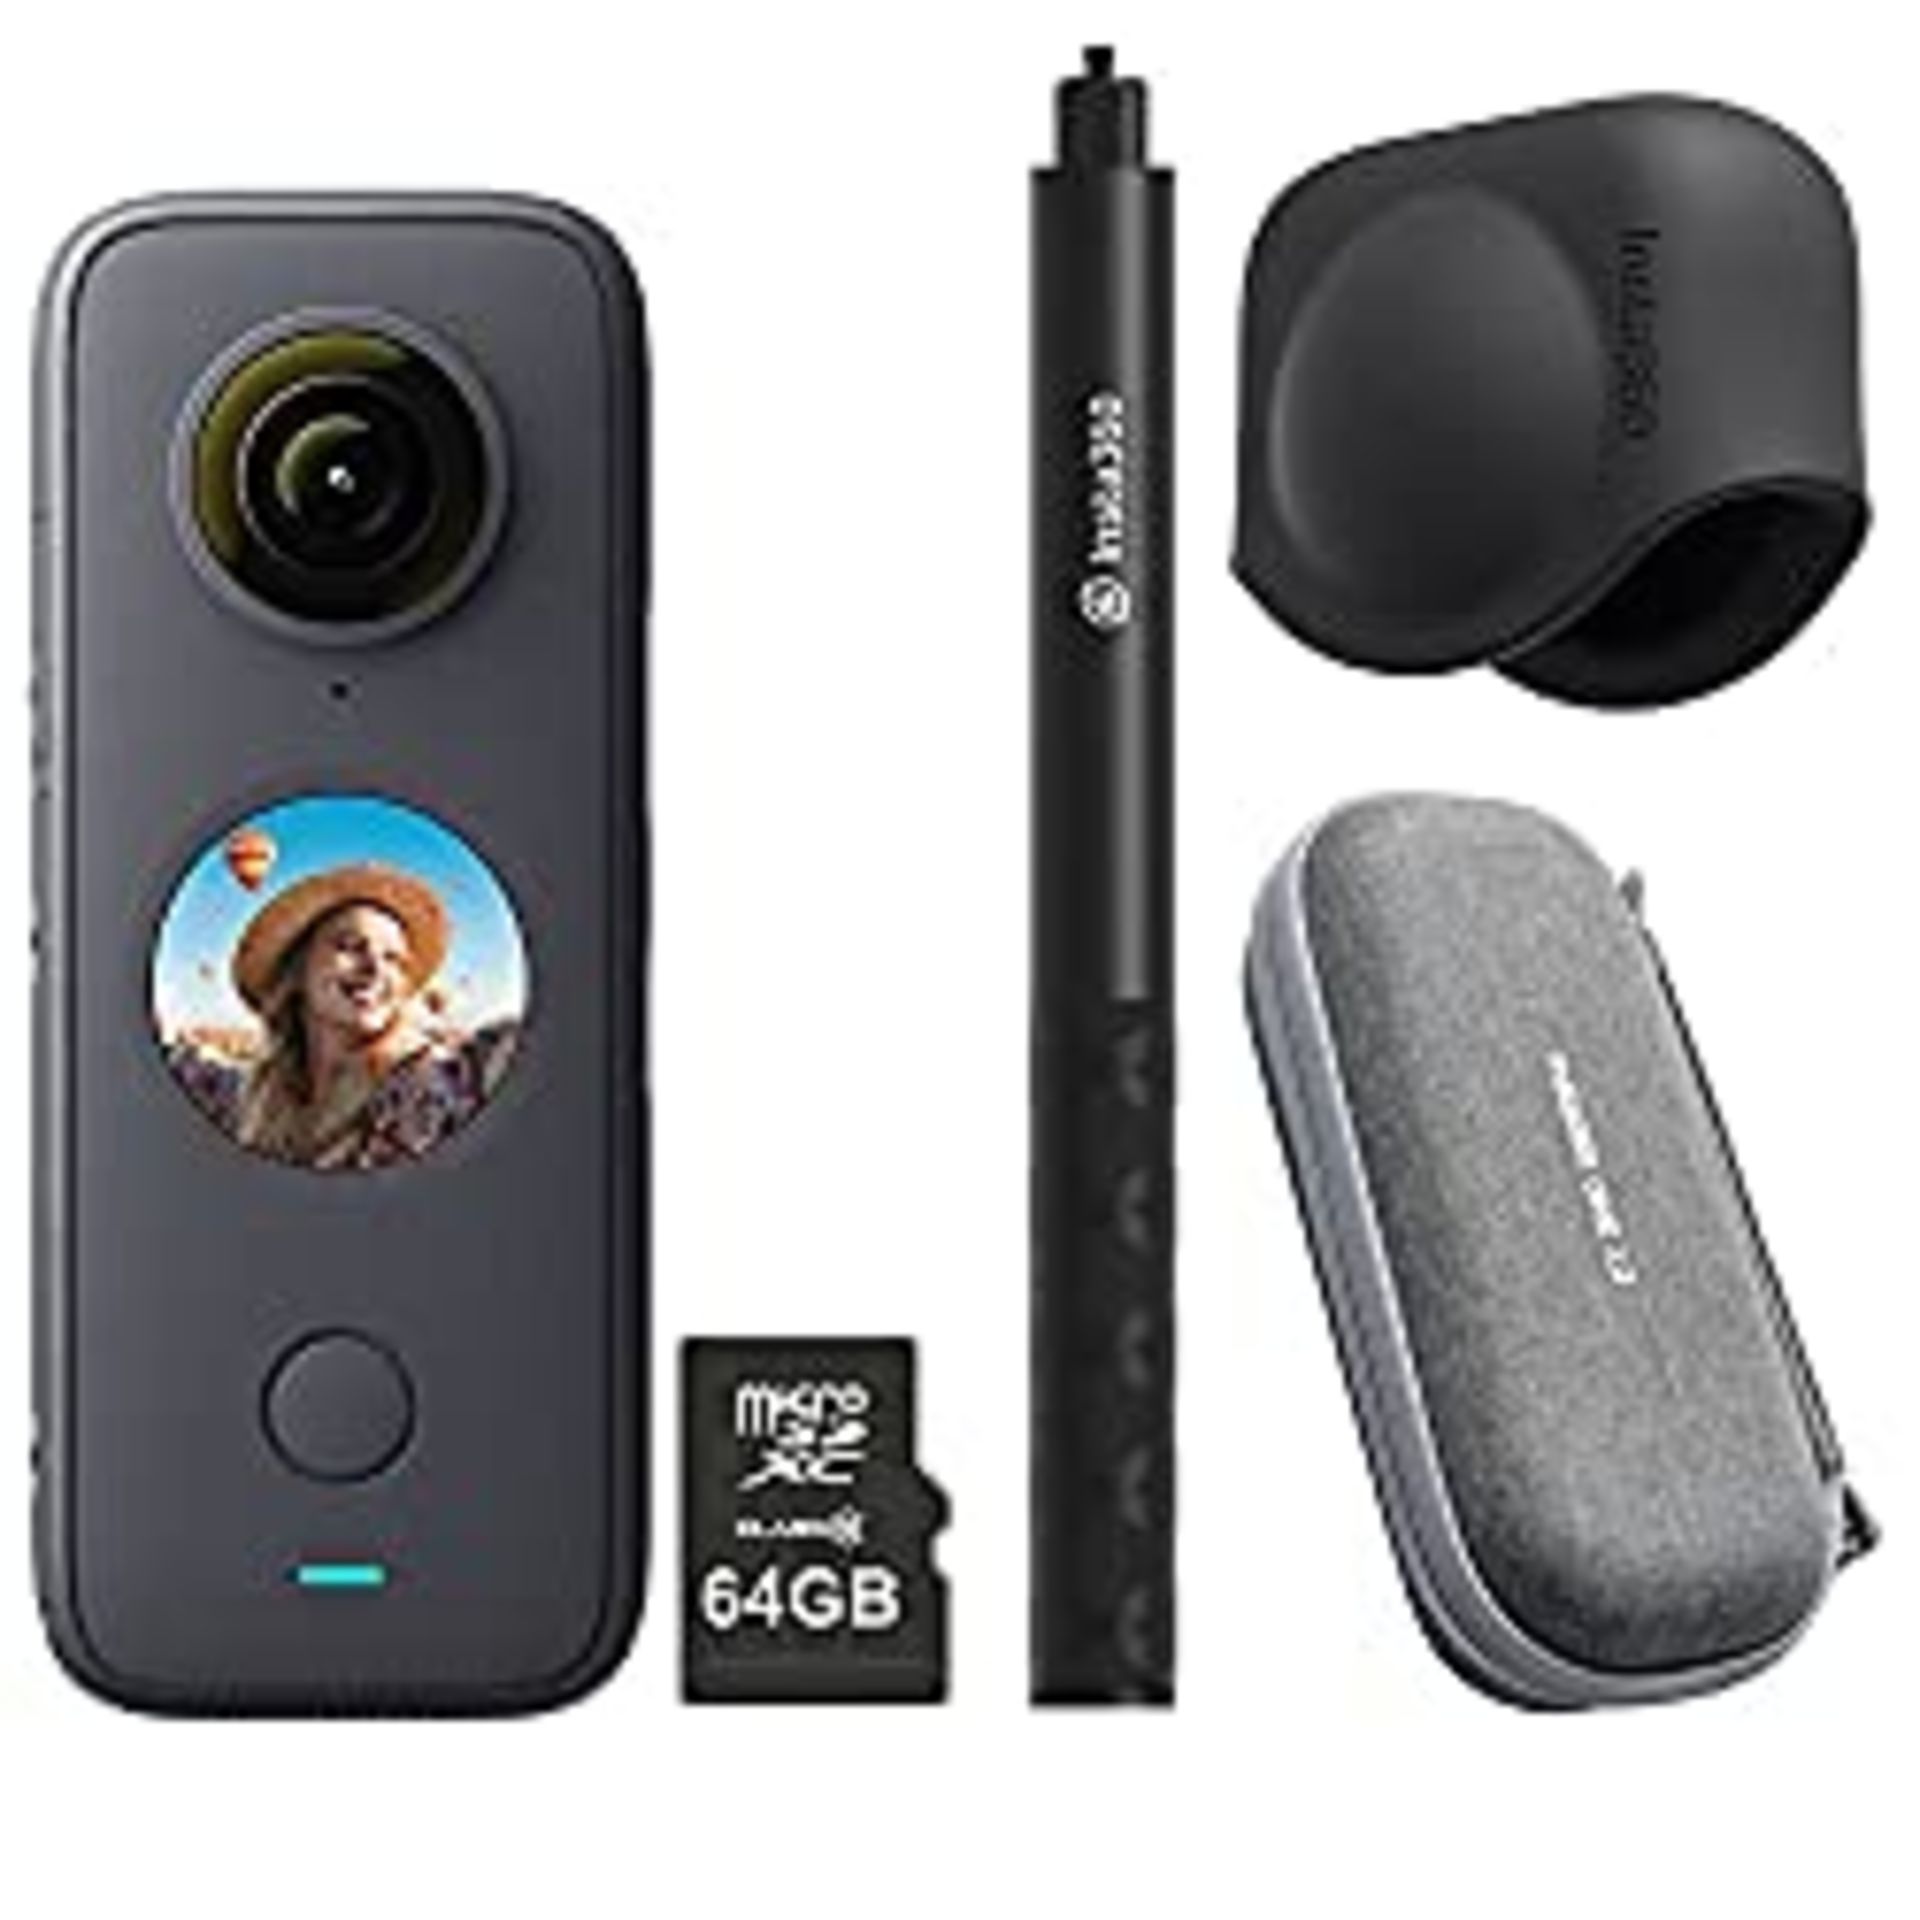 RRP £449.00 Insta360 ONE X2 360 Degree Action Camera PRO Kit includes